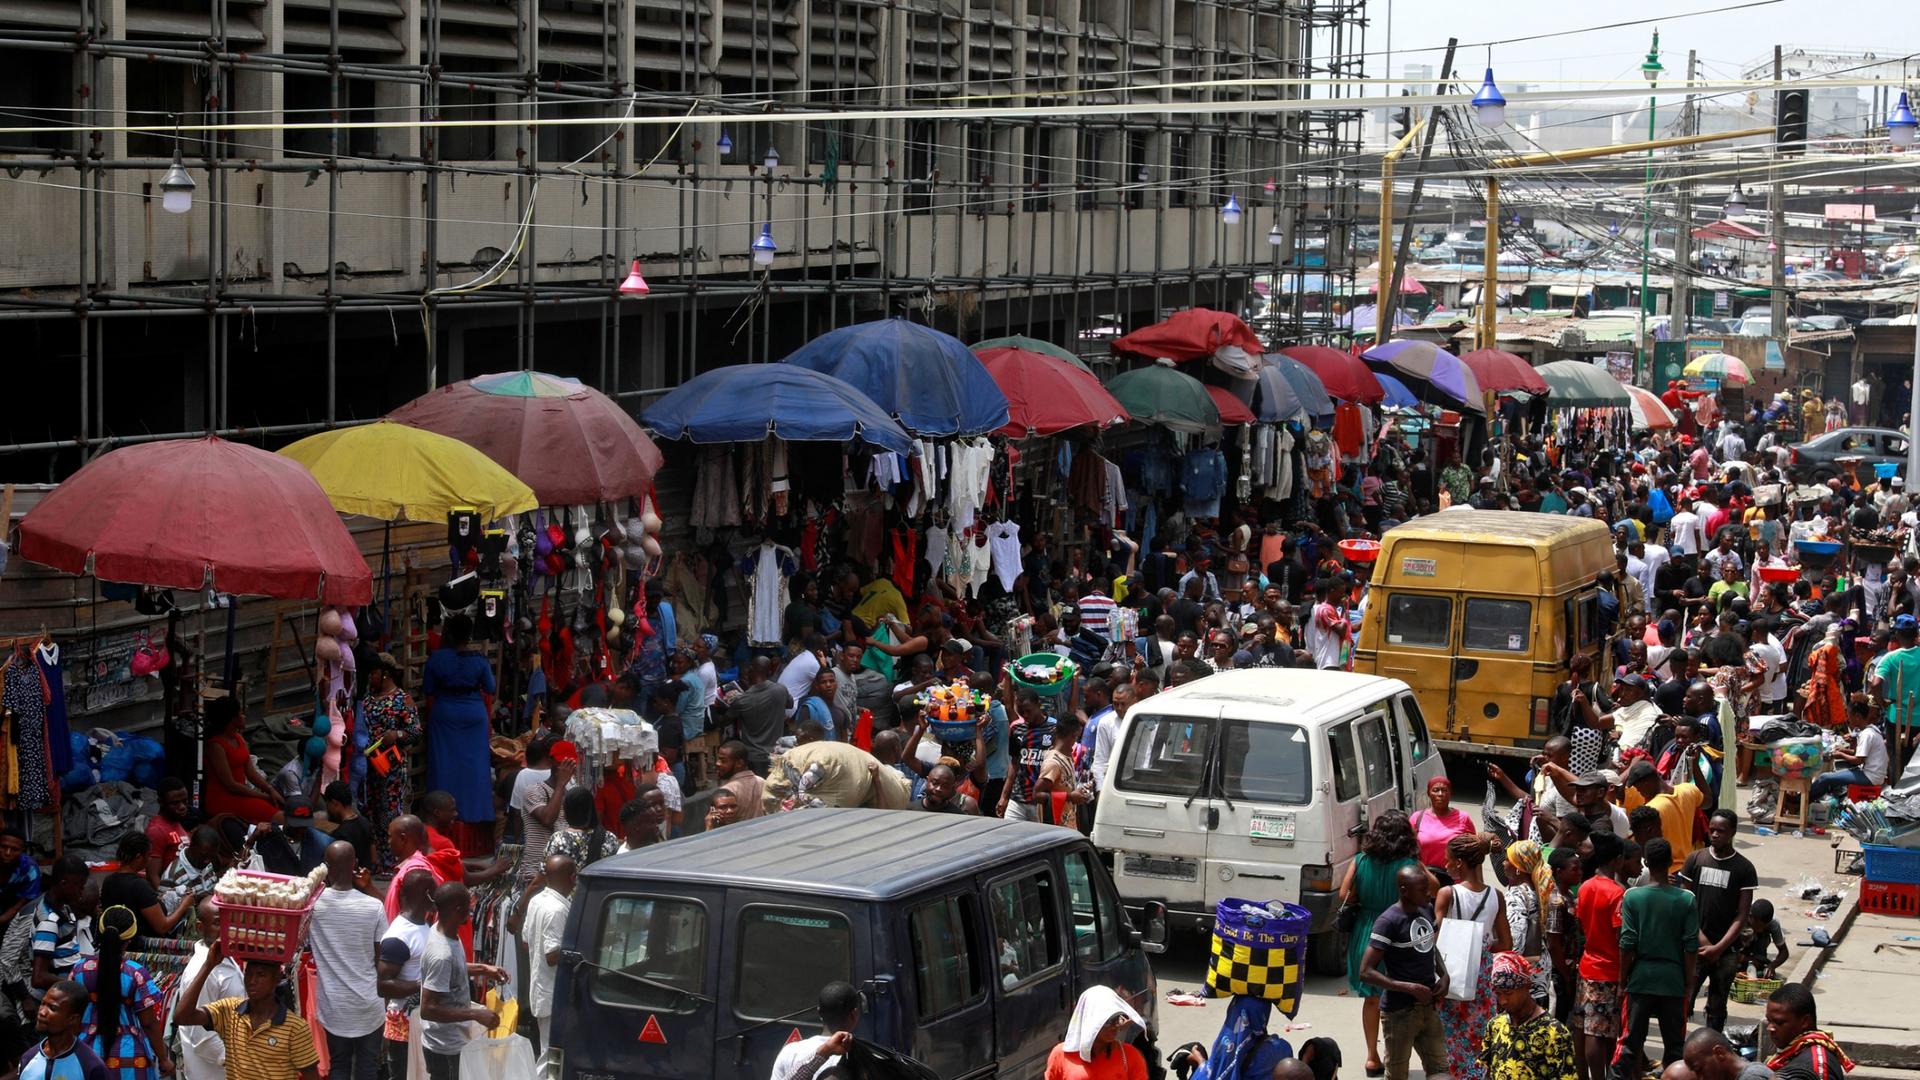 A bustling market is shown with hundreds of peope packed into the street lined with large vendor umbrellas.